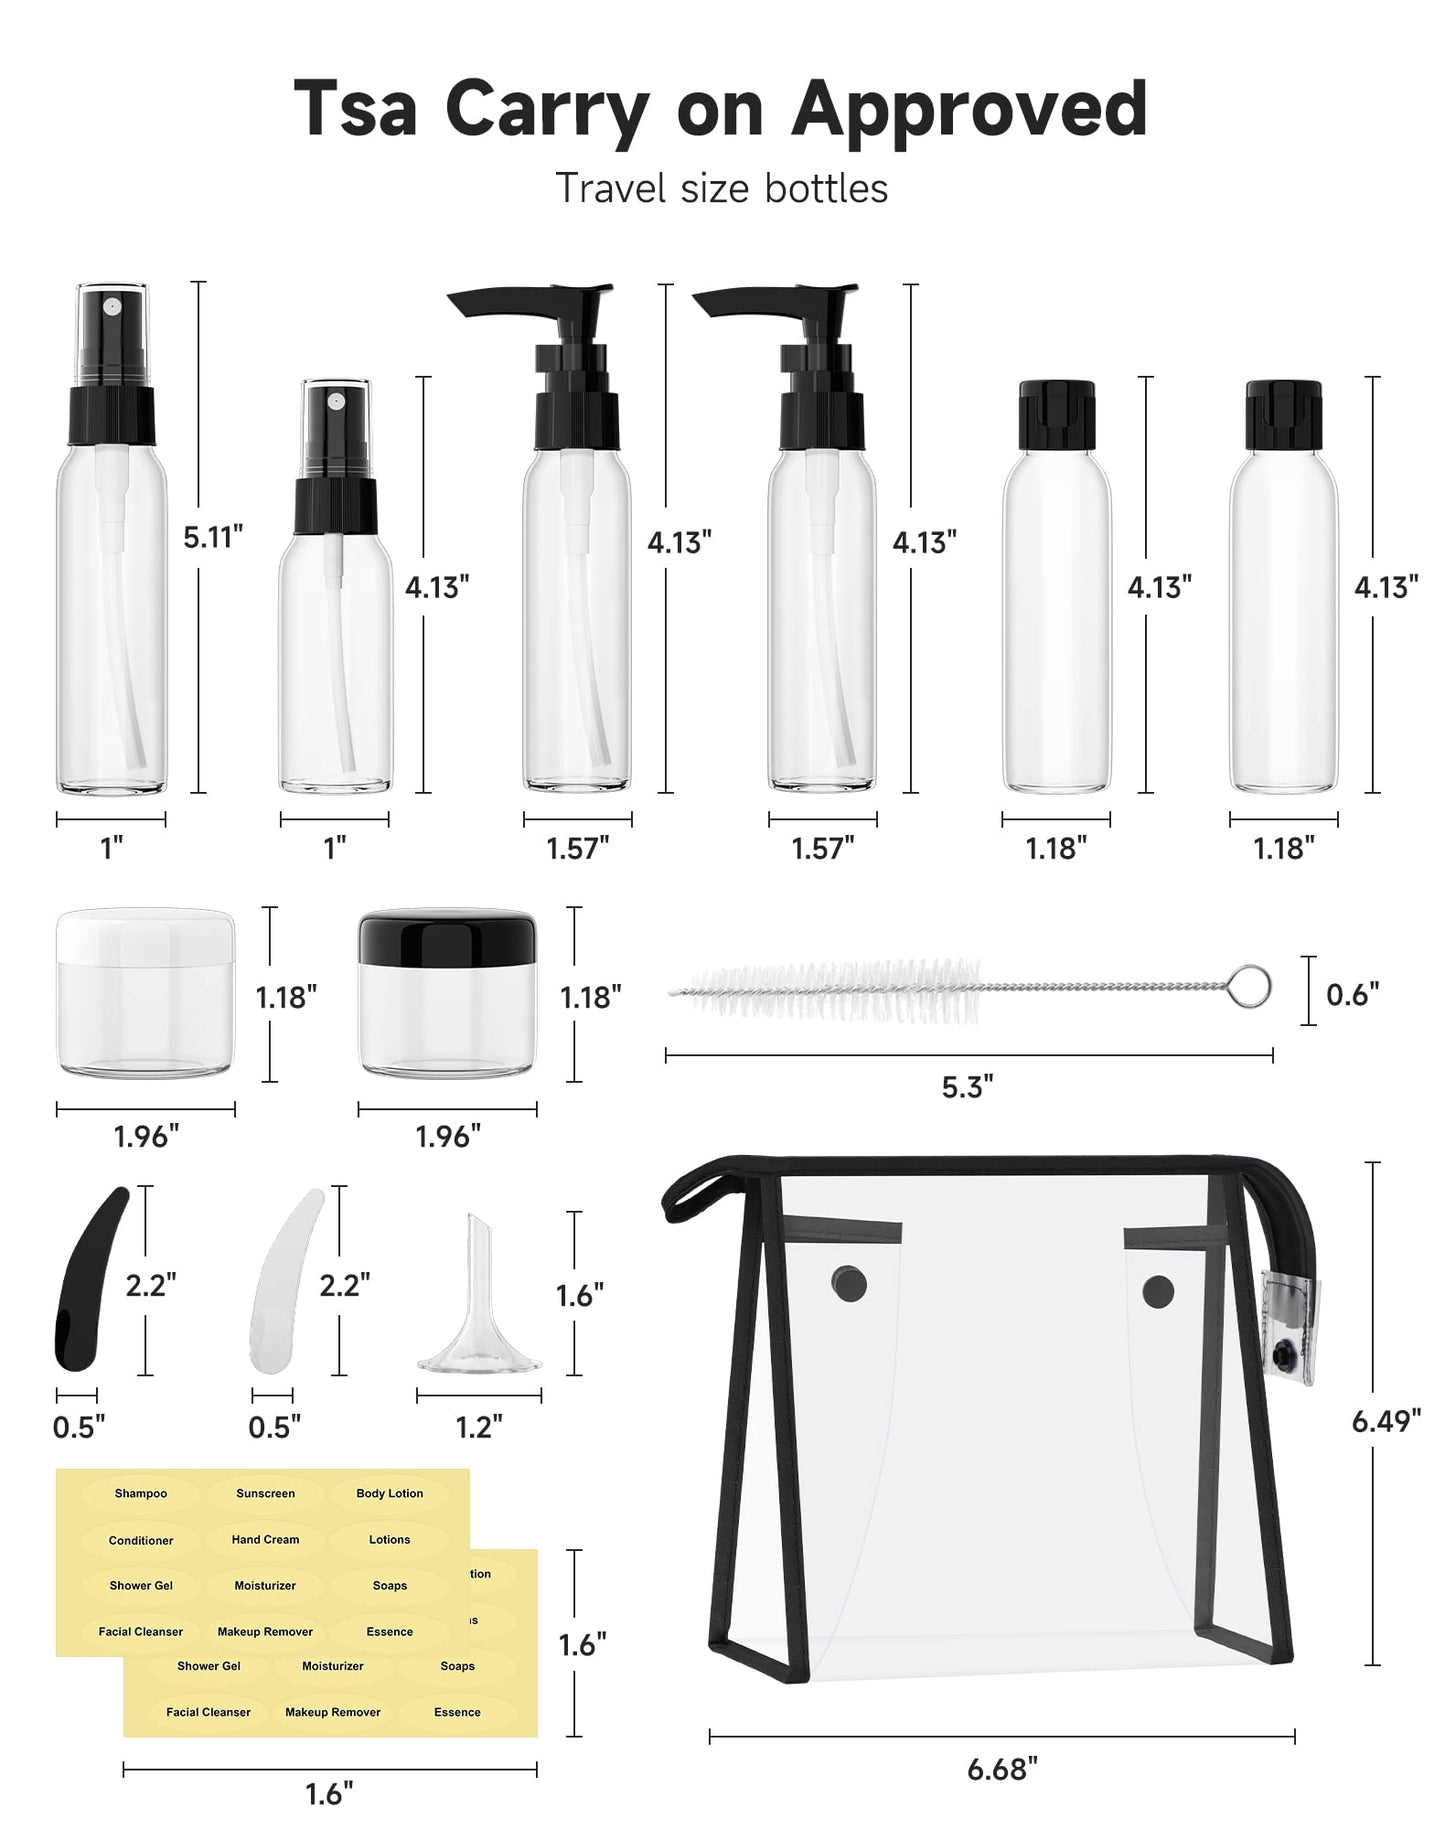 Morfone Travel Bottles kit, TSA Approved Travel Size Containers for Toiletries Leak Proof Refillable Liquid Travel Accessories with Toiletry Bag for Cosmetic Shampoo Conditioner Lotion